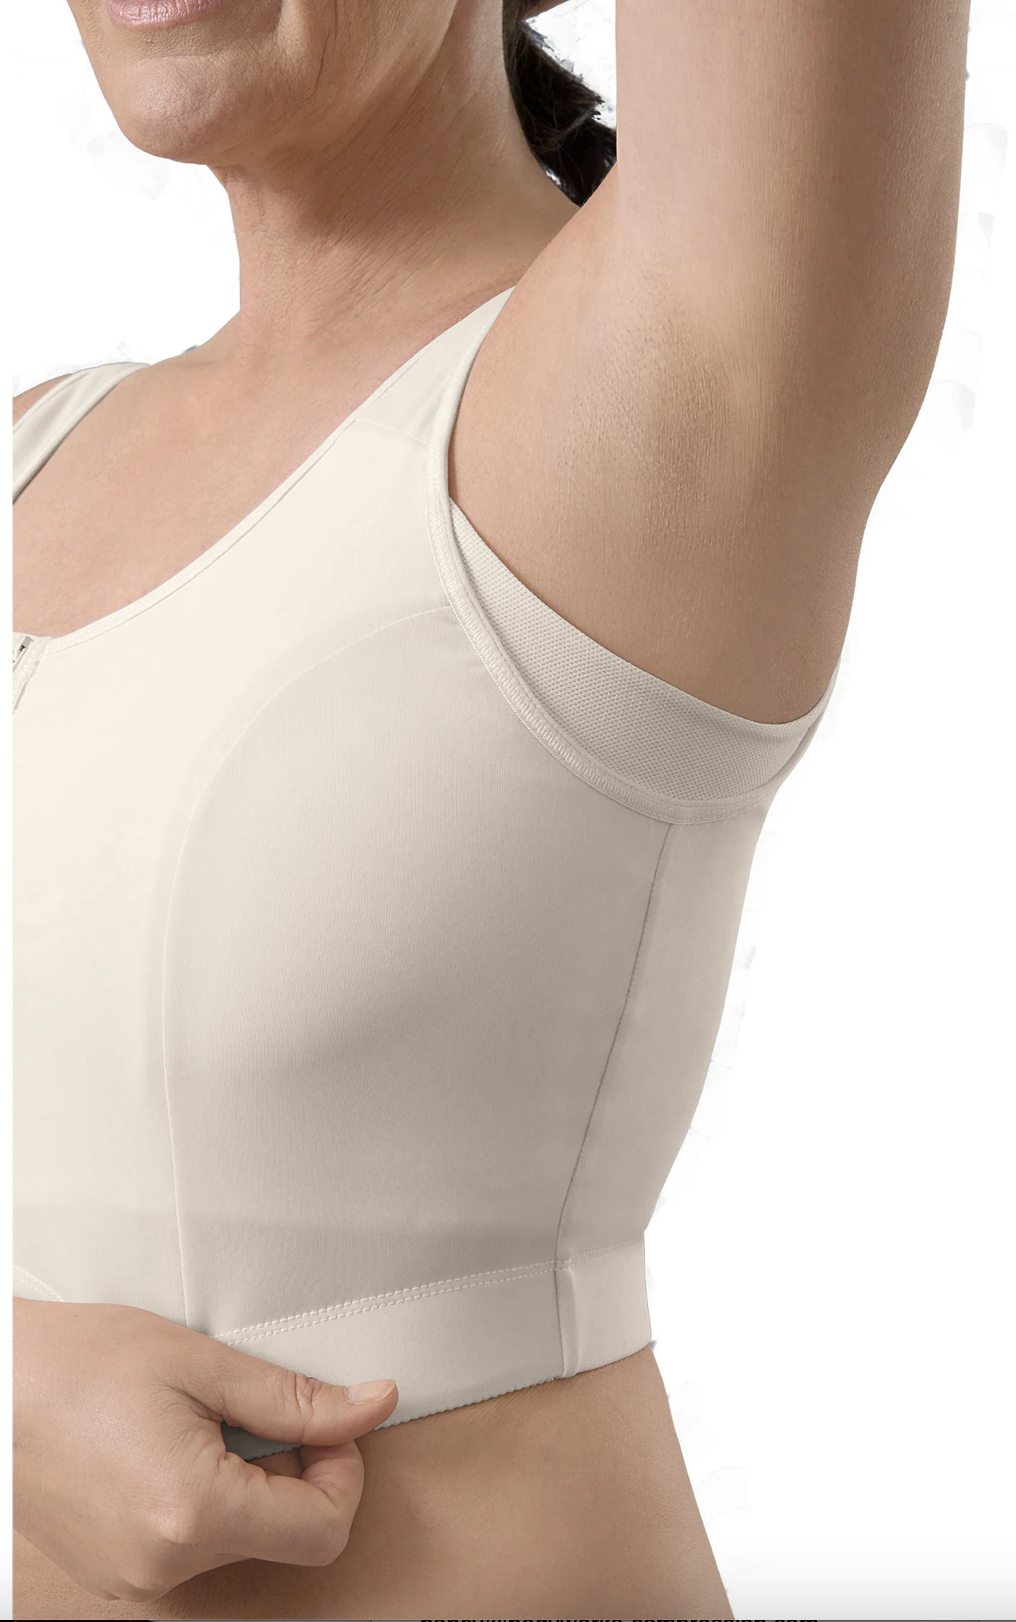 Top Compression Garments for Post-Breast Cancer Lymphedema